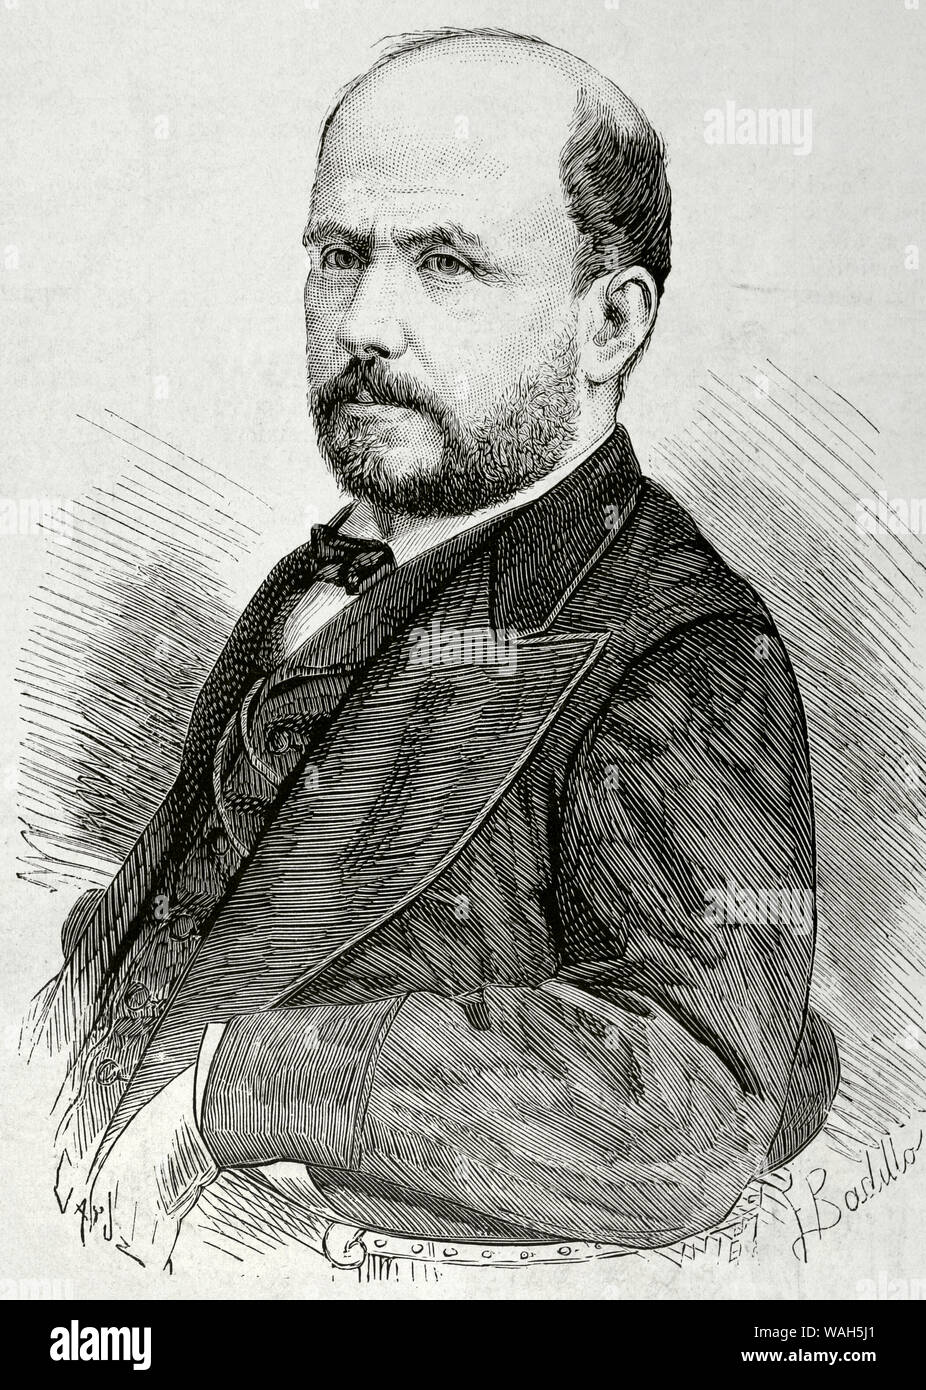 Anibal Pinto Garmendia (1825-1884). Chilean politician. President of Chile between 1871 and 1881 for the Liberal Party. He had to face the monetary crisis and declared war on Peru and Bolivia in 1879. Drawing by Badillo. Engraving by Capuz. La Ilustracion Española y Americana, March 22, 1876. Stock Photo